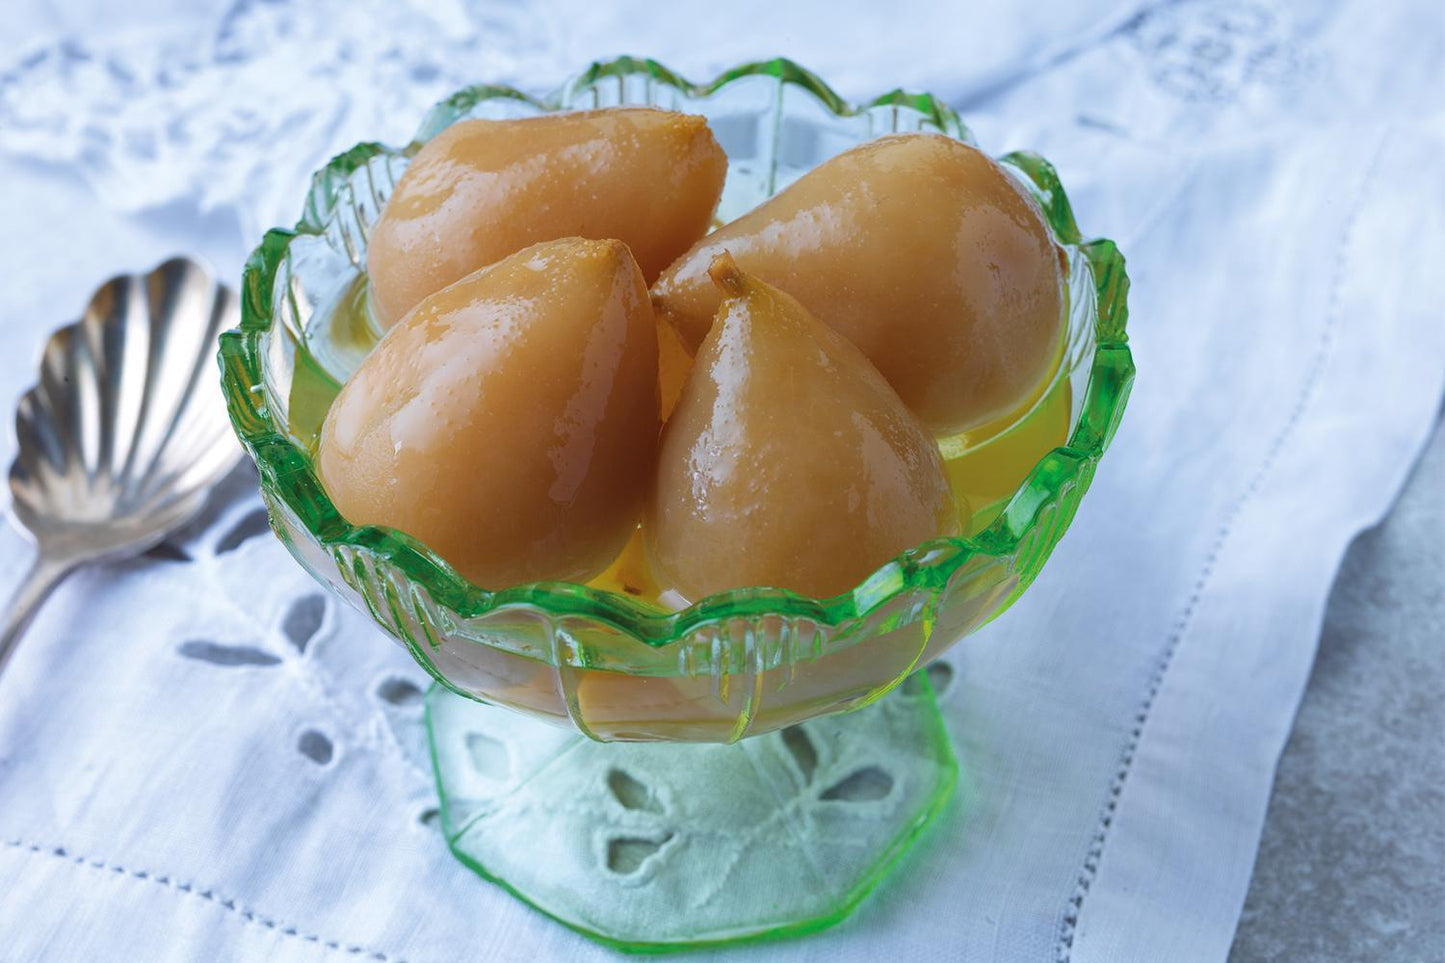 Pears with Calvados in Syrup - DukesHill